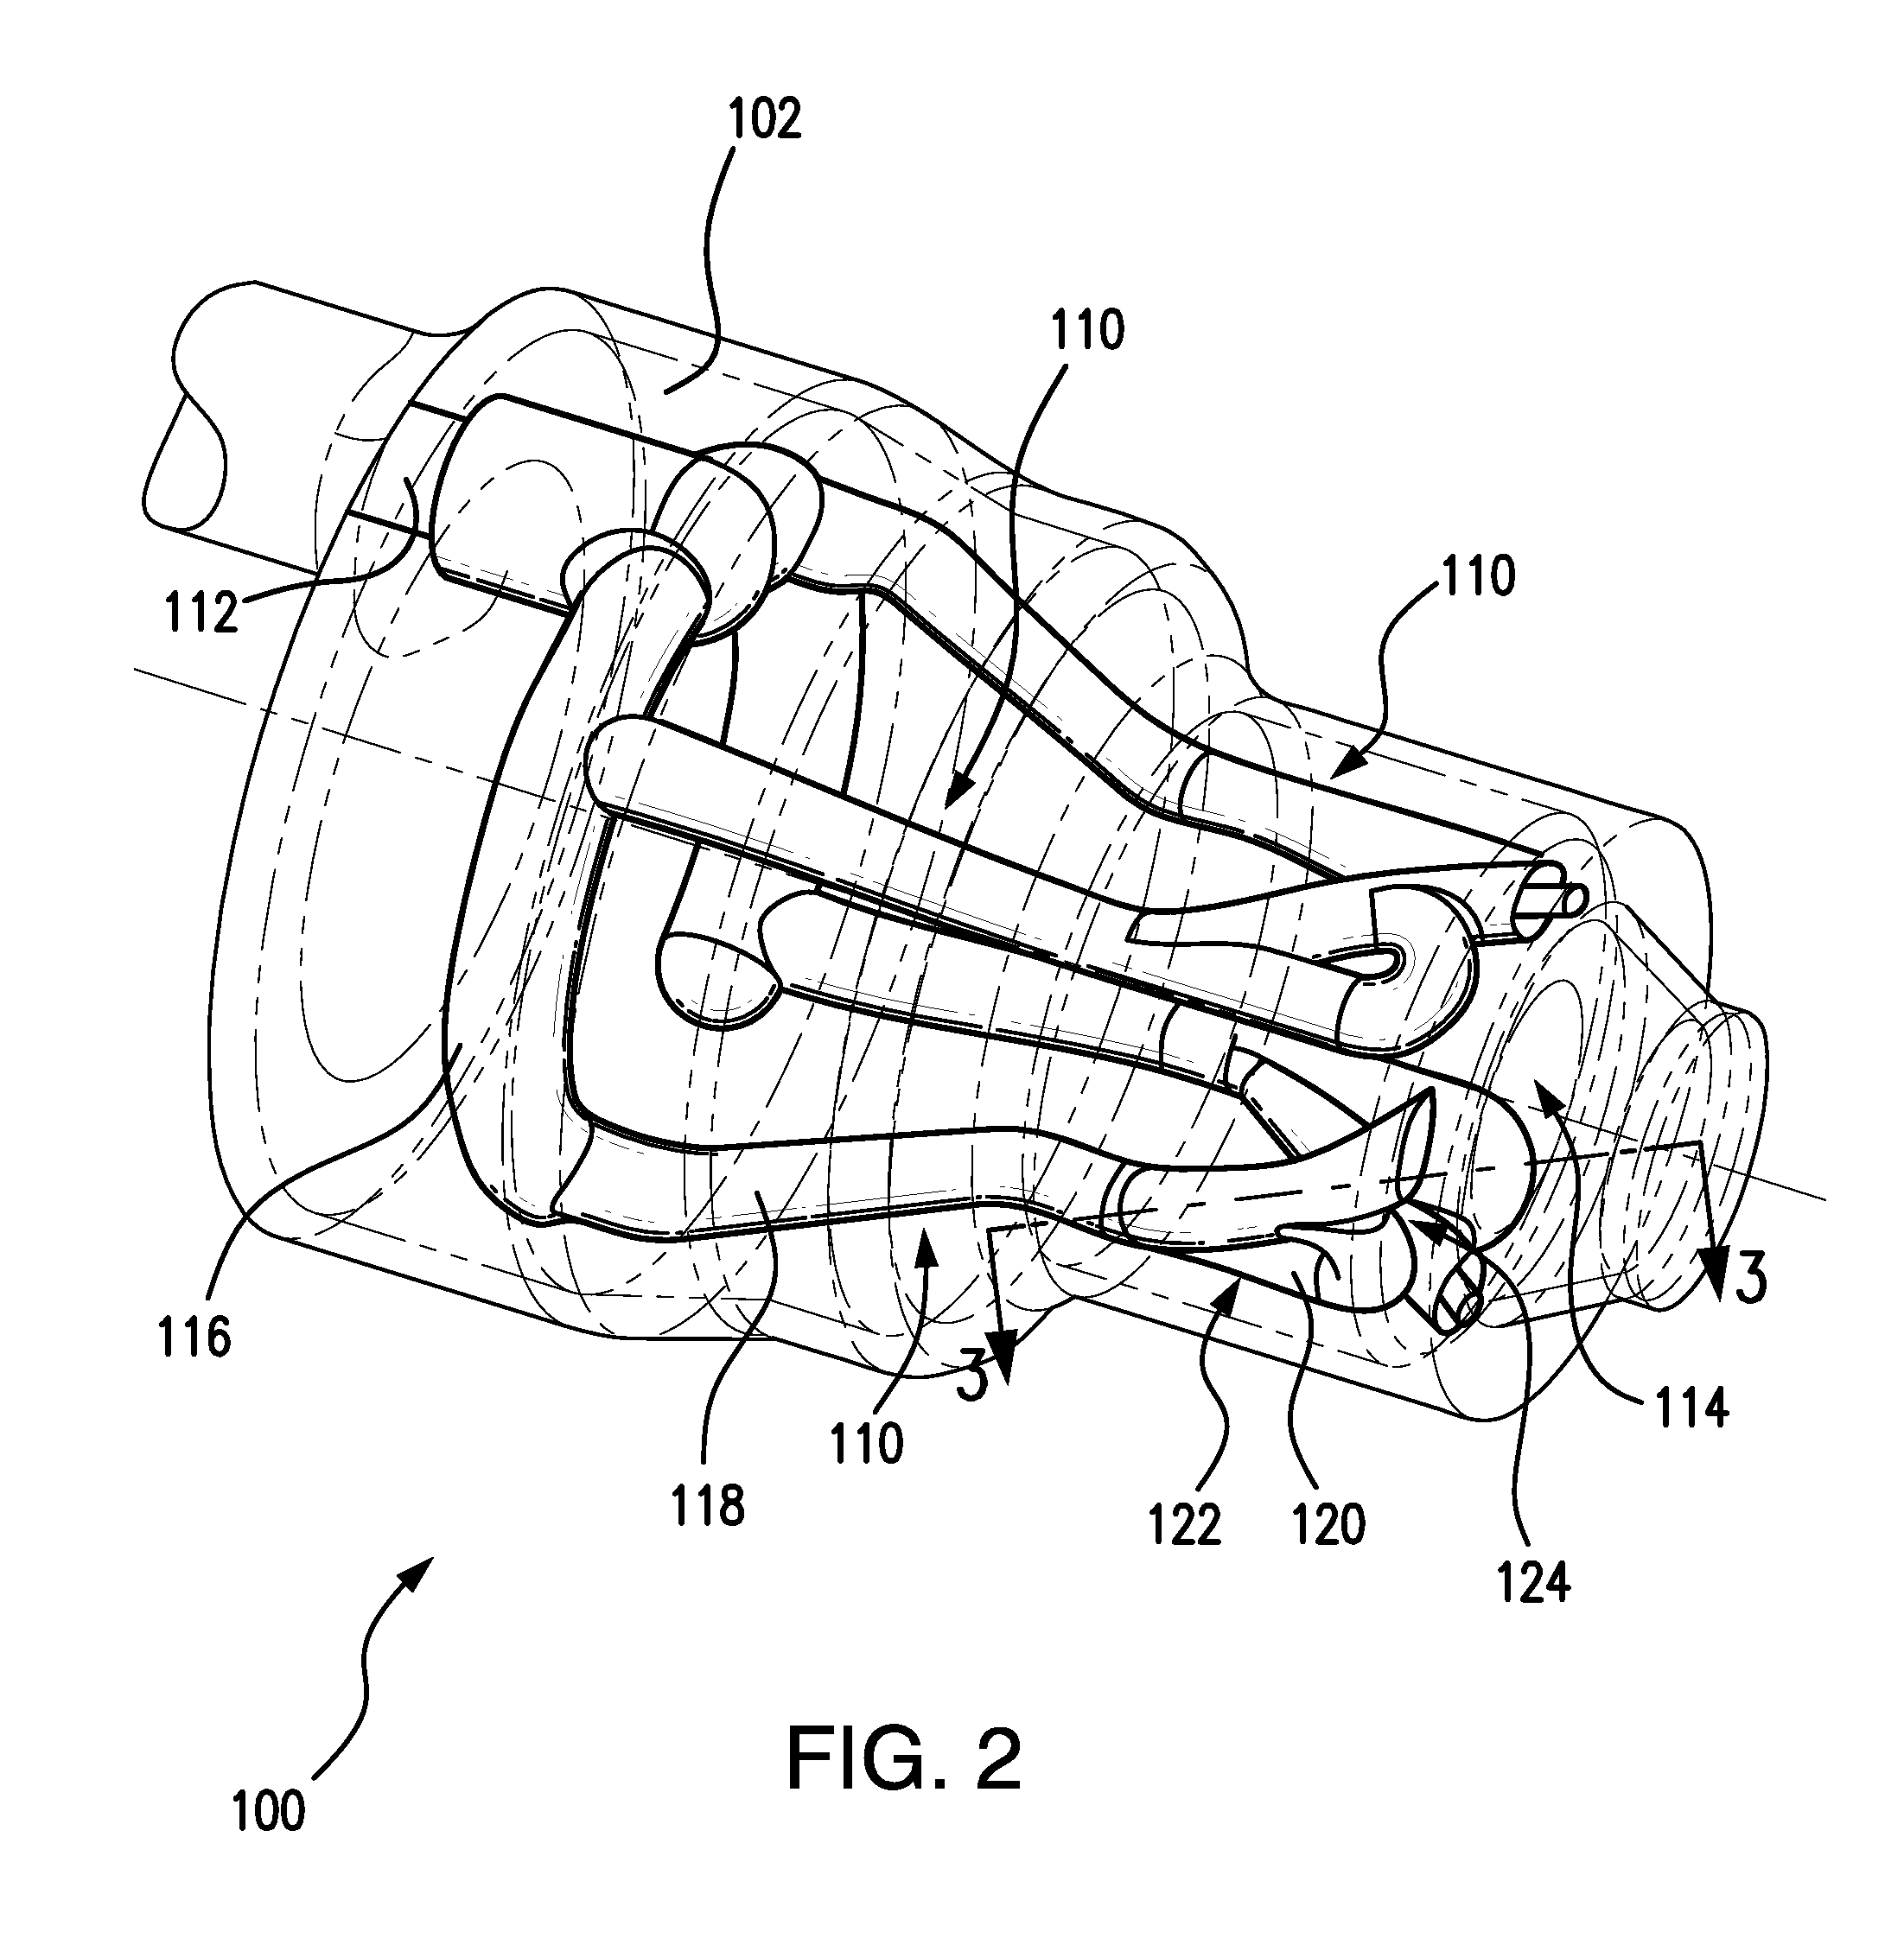 Fuel injectors for gas turbine engines